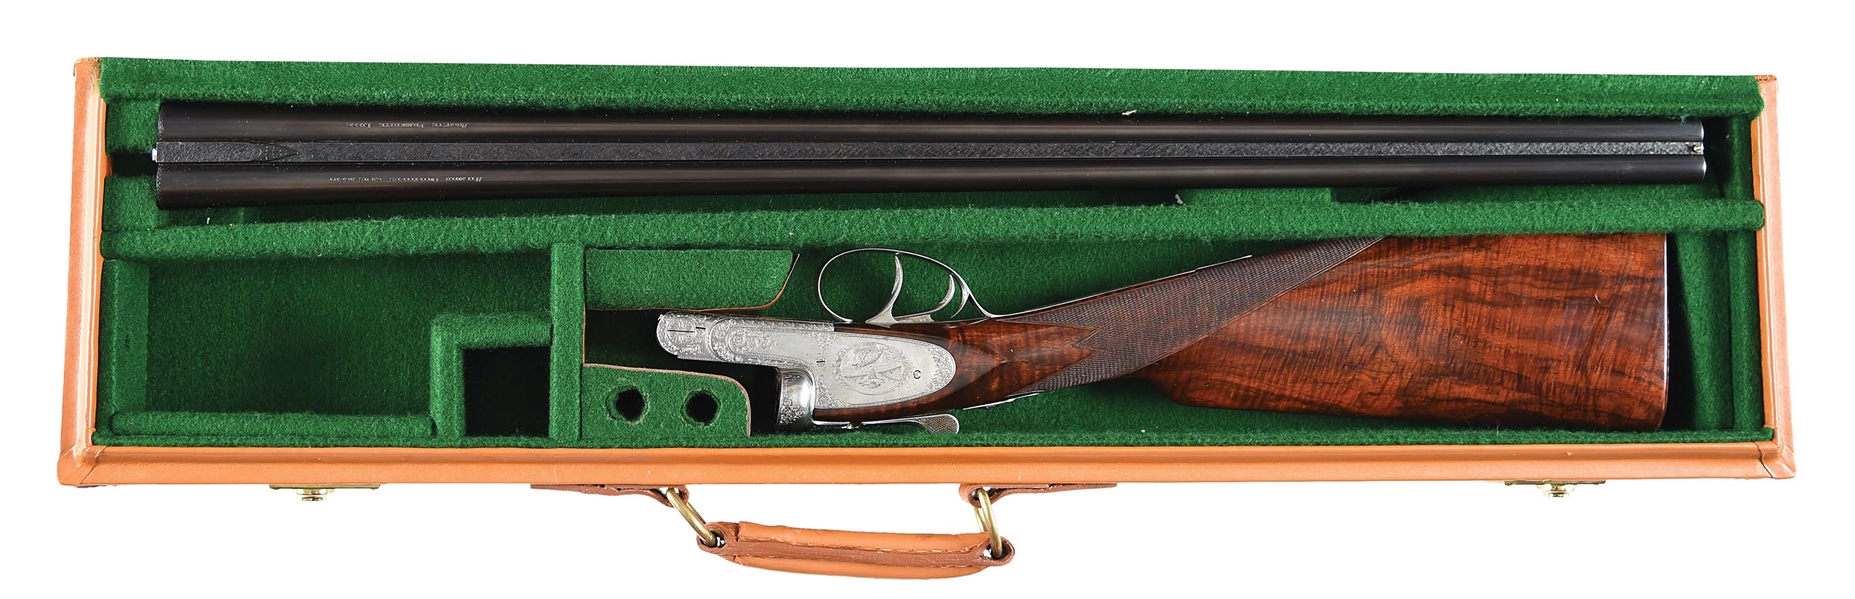 (M) ATTRACTIVE SIDEPLATED BOXLOCK AUGUSTE FRANCOTTE 28 BORE SIDE BY SIDE SHOTGUN ENGRAVED BY VIEVOYE WITH DOVE, QUAIL, AND SCROLL.